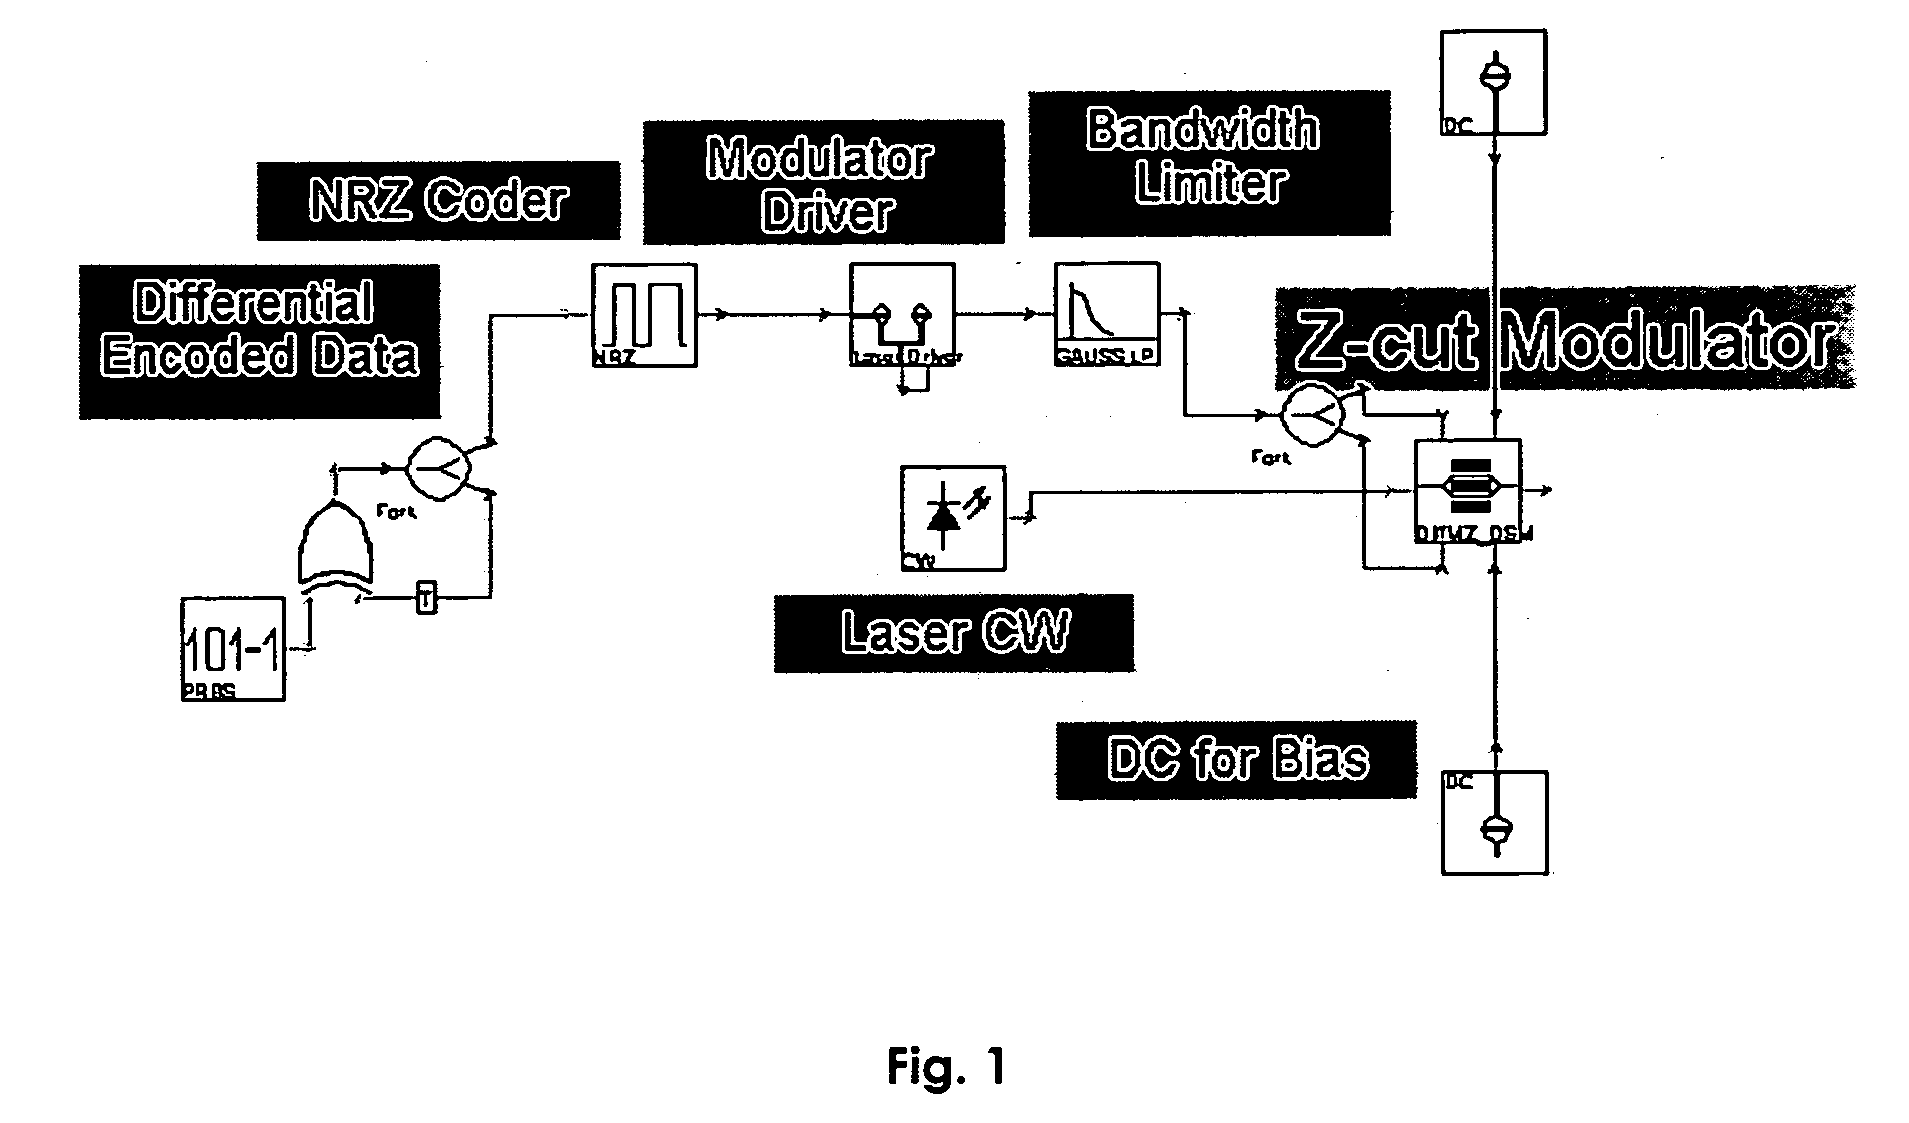 Bandwidth limited frequency shift keying modulation format